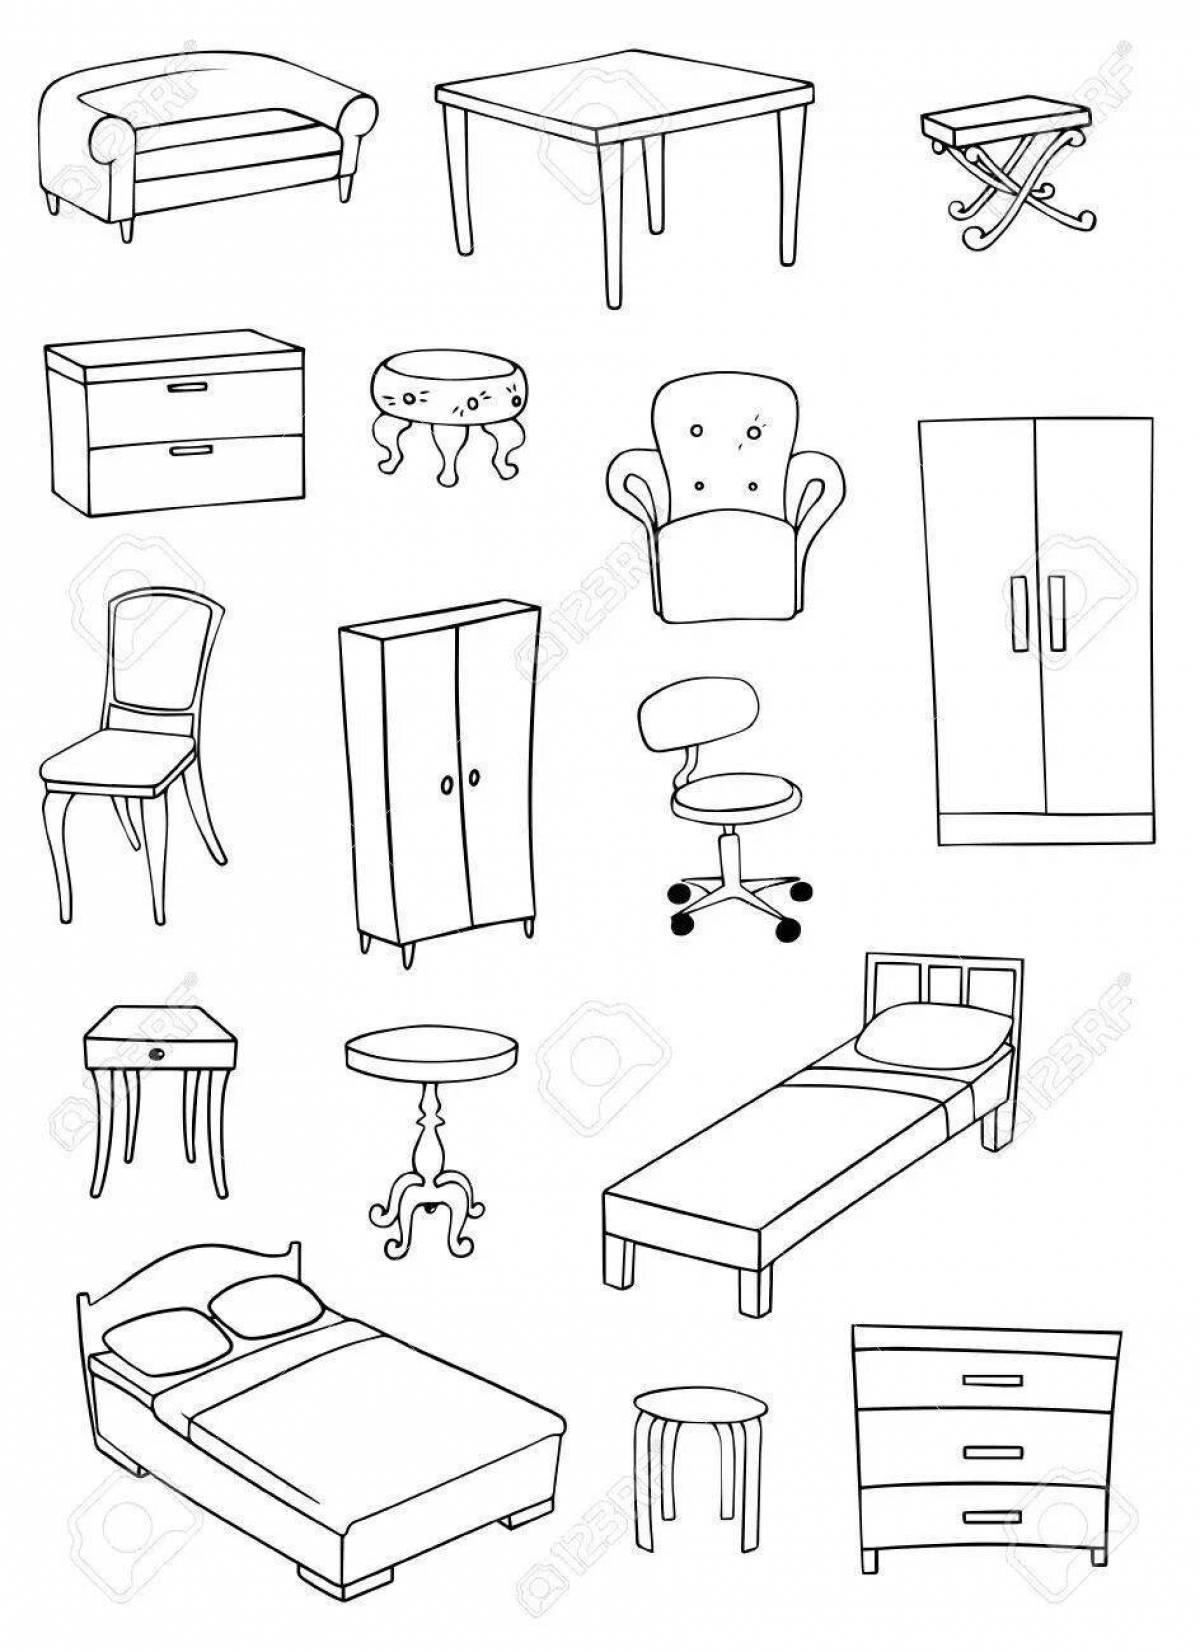 Colorful furniture coloring page